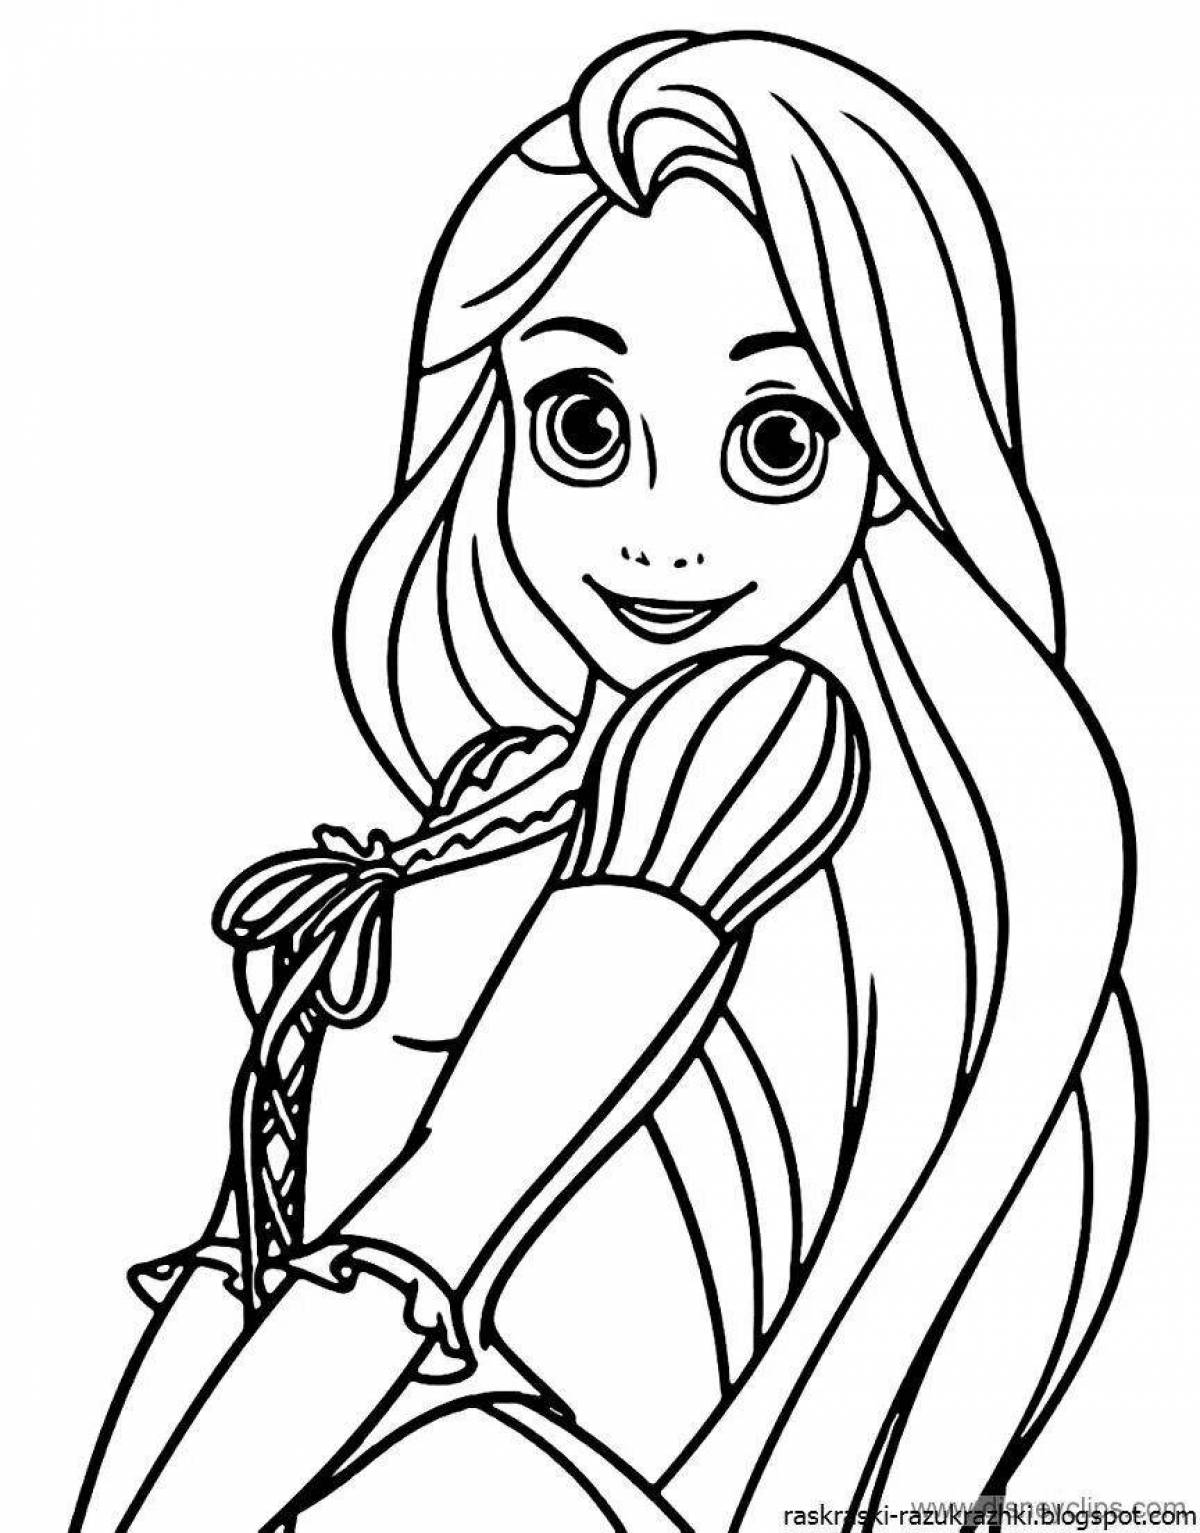 Fantastic rapunzel coloring book for kids 5-6 years old